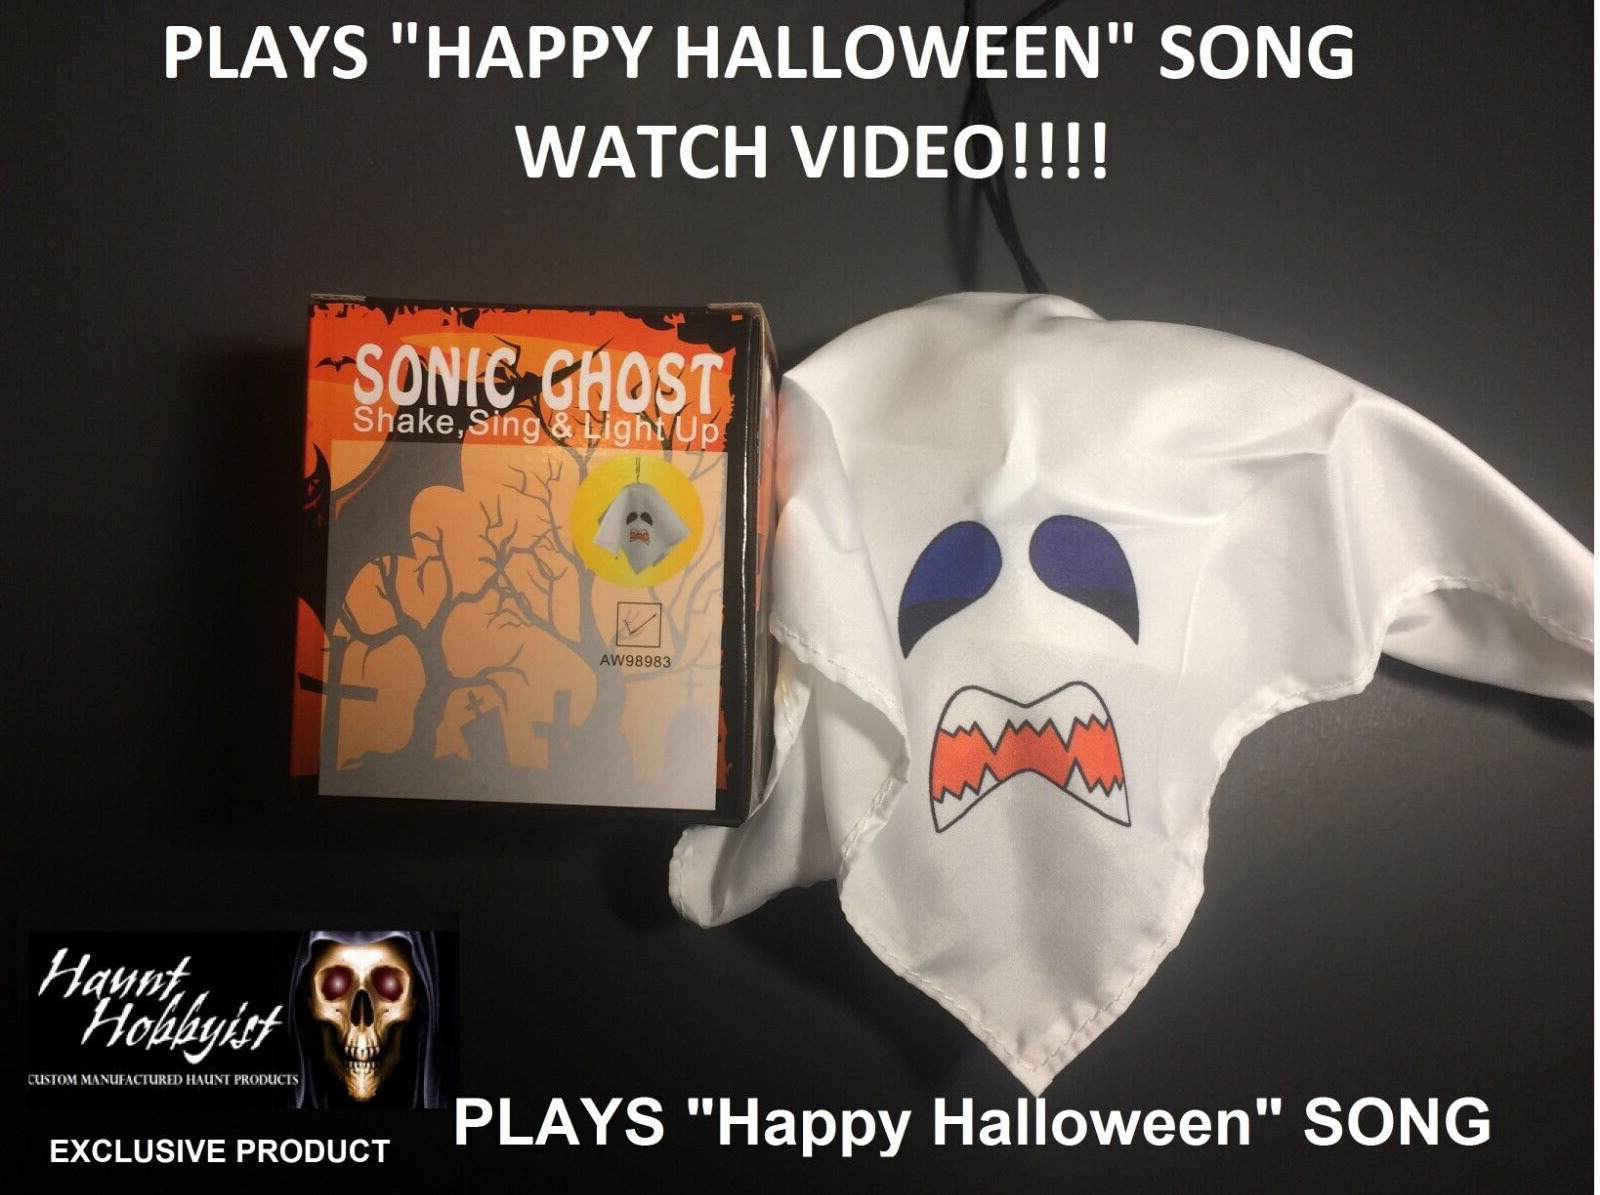 Sonic Ghost Shakes, lights up LED sound Halloween song scary NEW NOT vintage